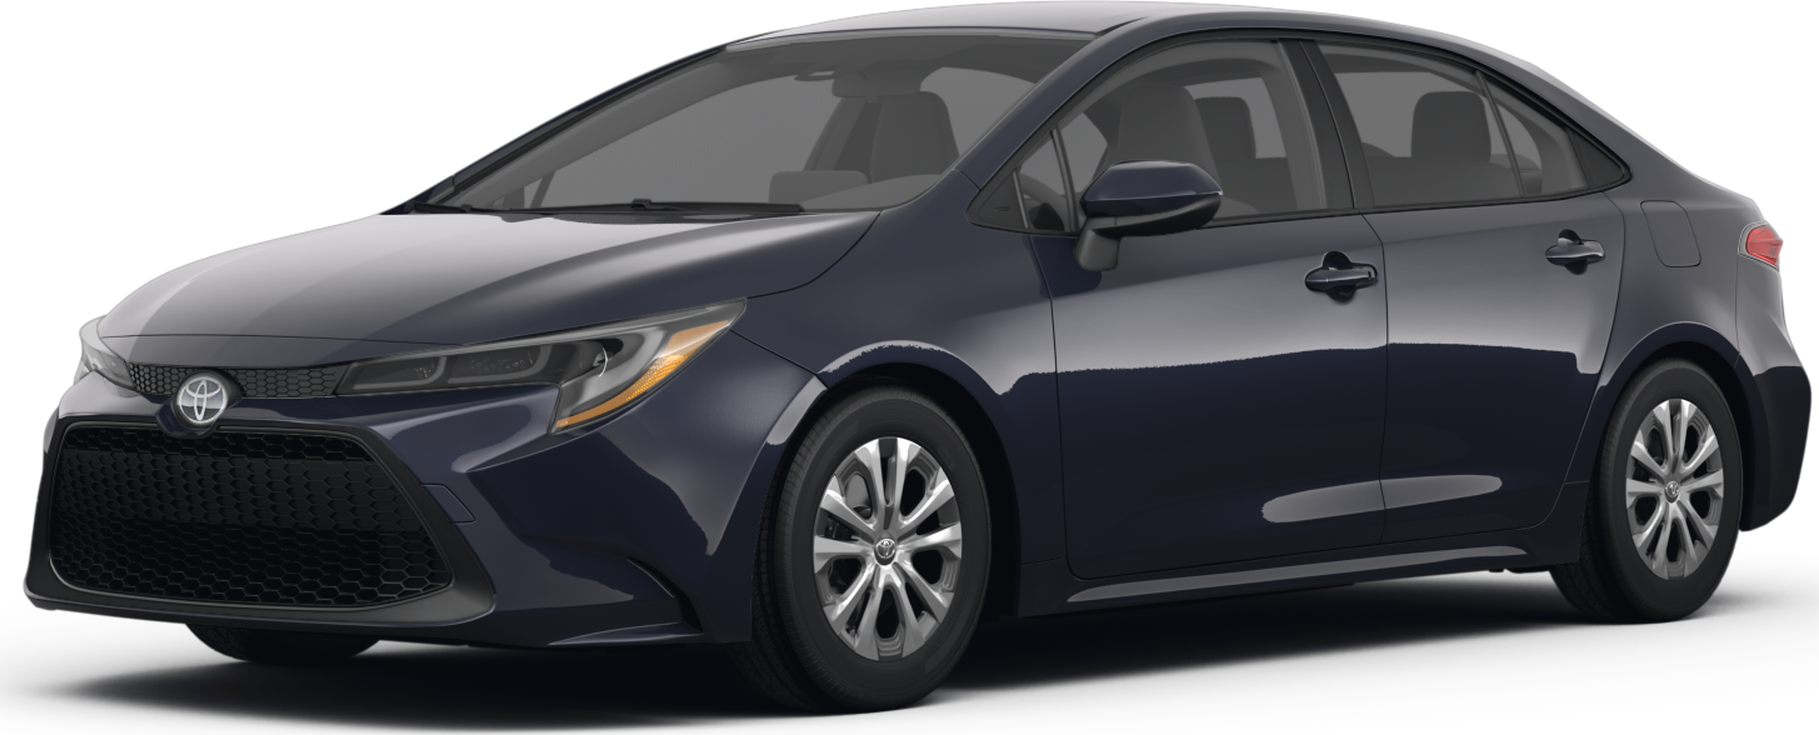 https://file.kelleybluebookimages.com/kbb/base/evox/CP/44005/2024-Toyota-Corolla%20Hybrid-front_44005_032_1819x735_8X8_cropped.png